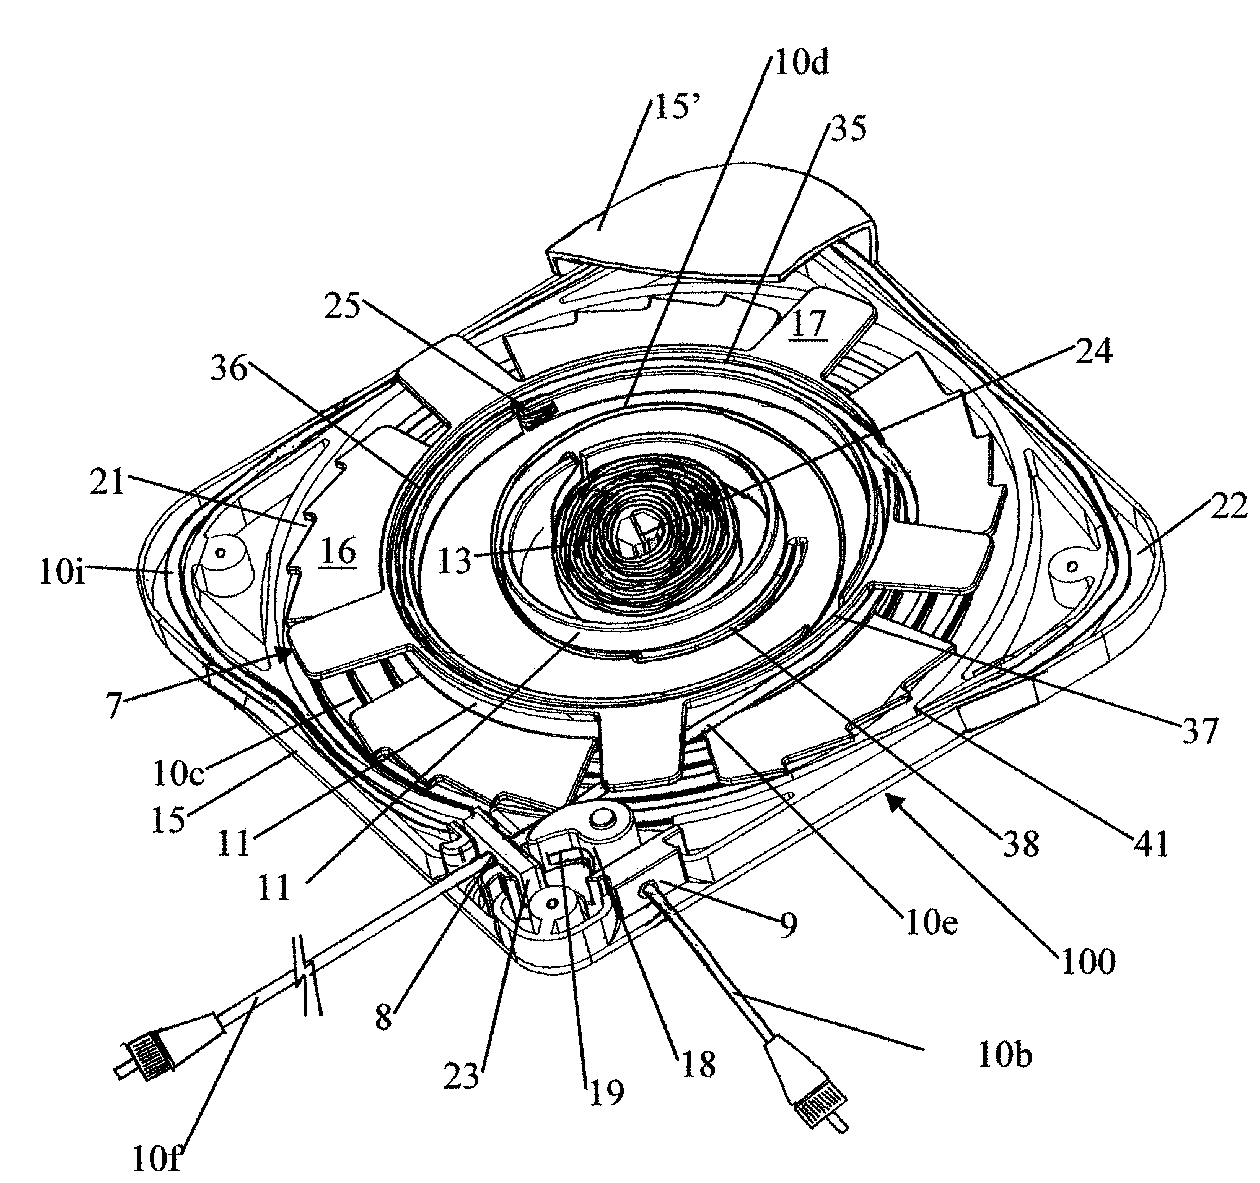 Fiber optic rotary coupling and devices